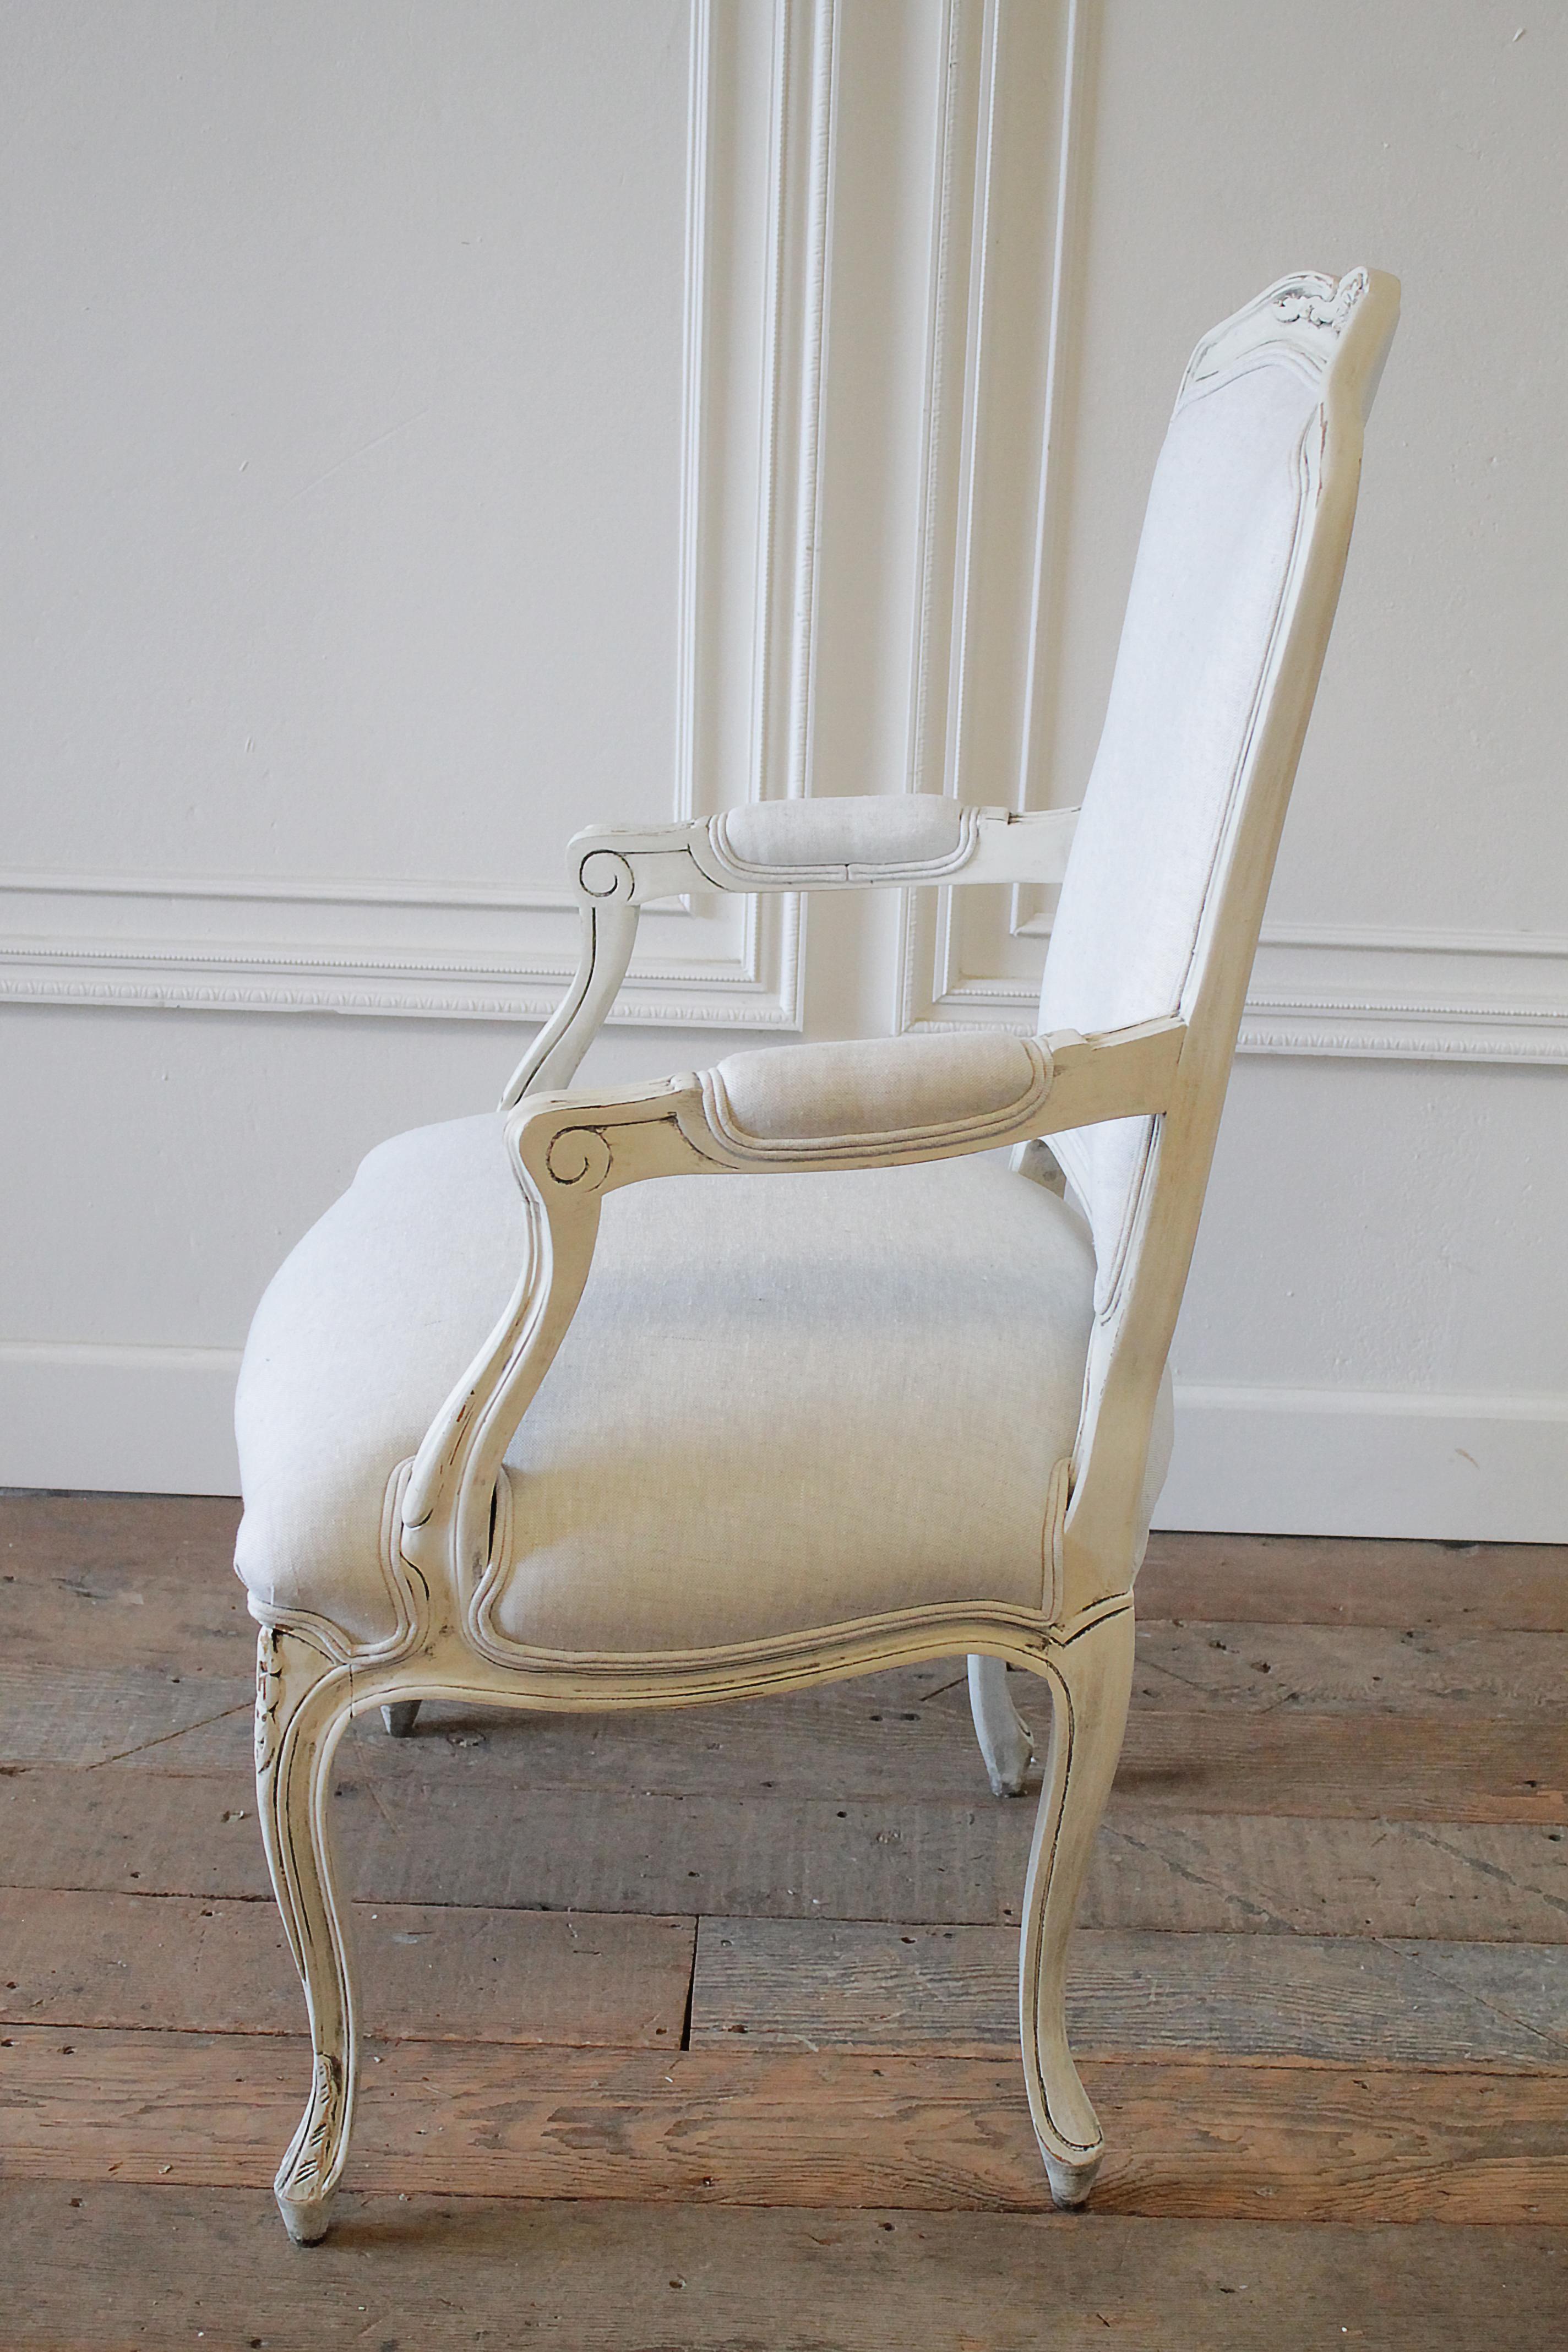 20th Century Painted French Provincial Style Chair and Ottoman Upholstered in Belgian Linen